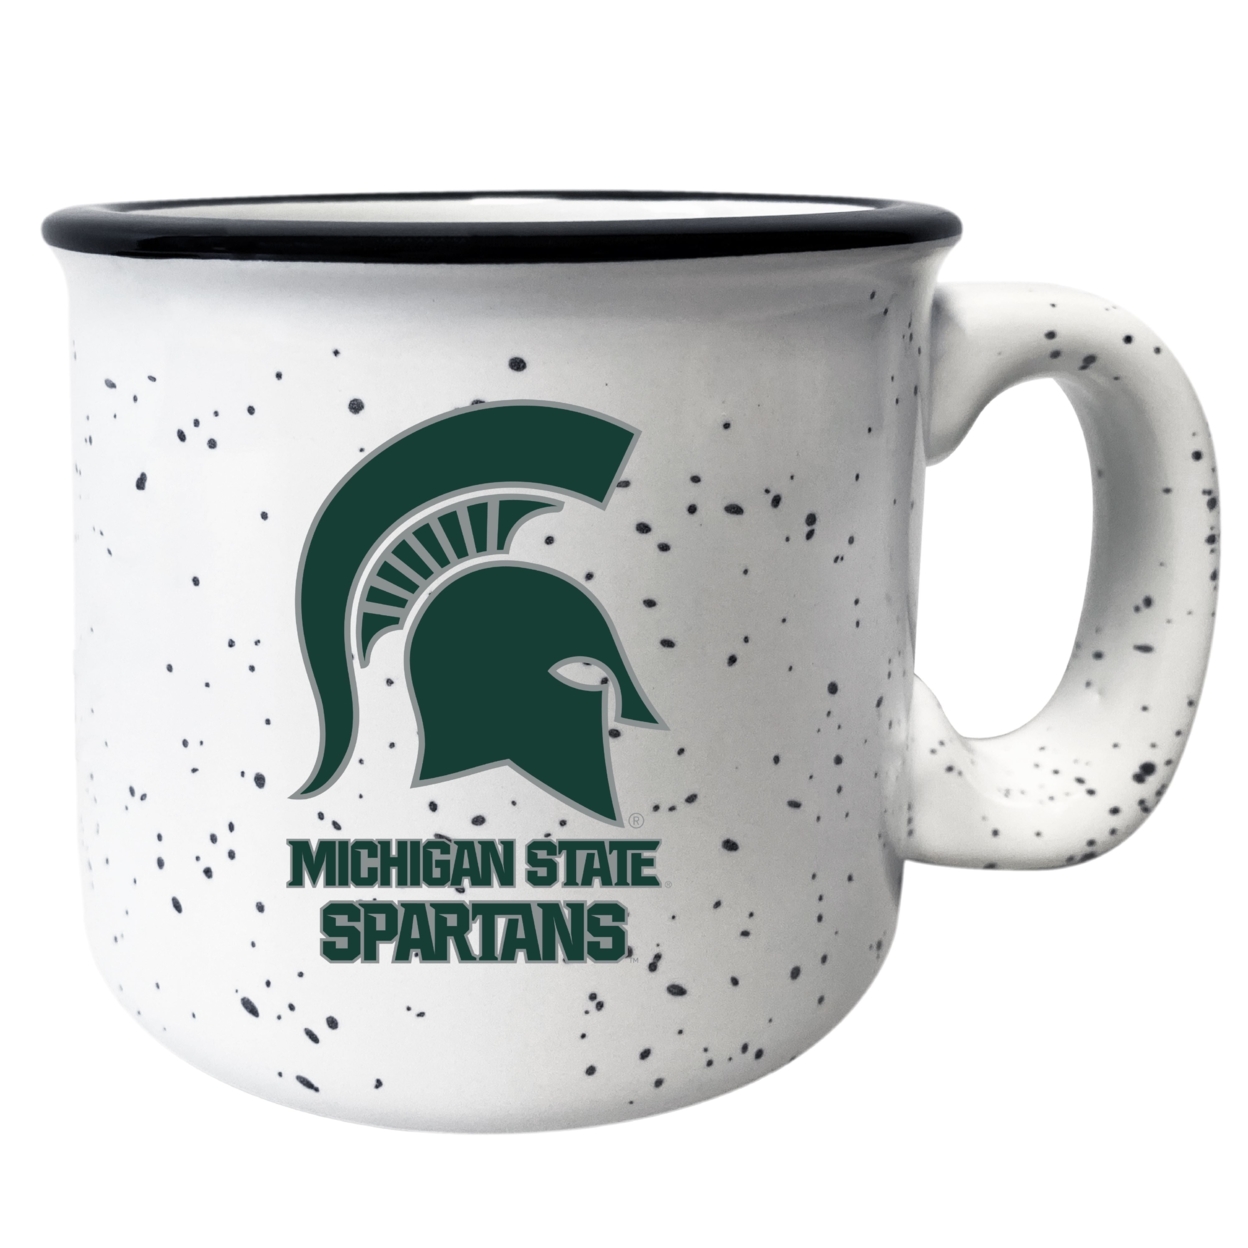 Michigan State Spartans Speckled Ceramic Camper Coffee Mug - Choose Your Color - White